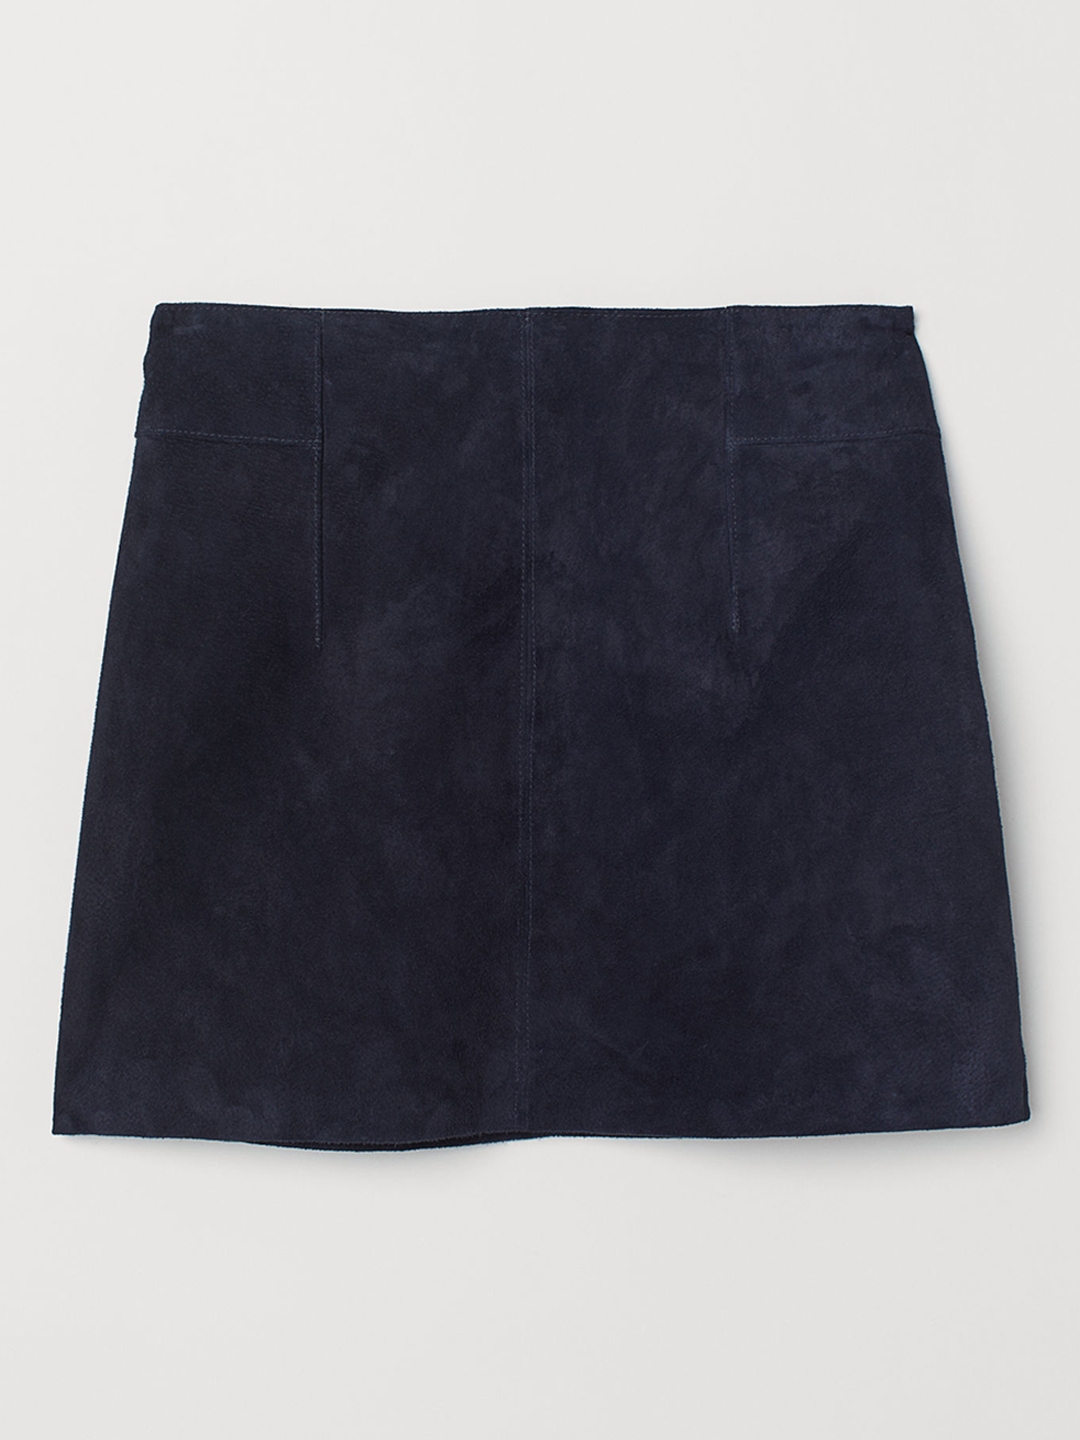 Buy H&M Women Navy Blue Solid Short Suede Skirt - Skirts for Women ...